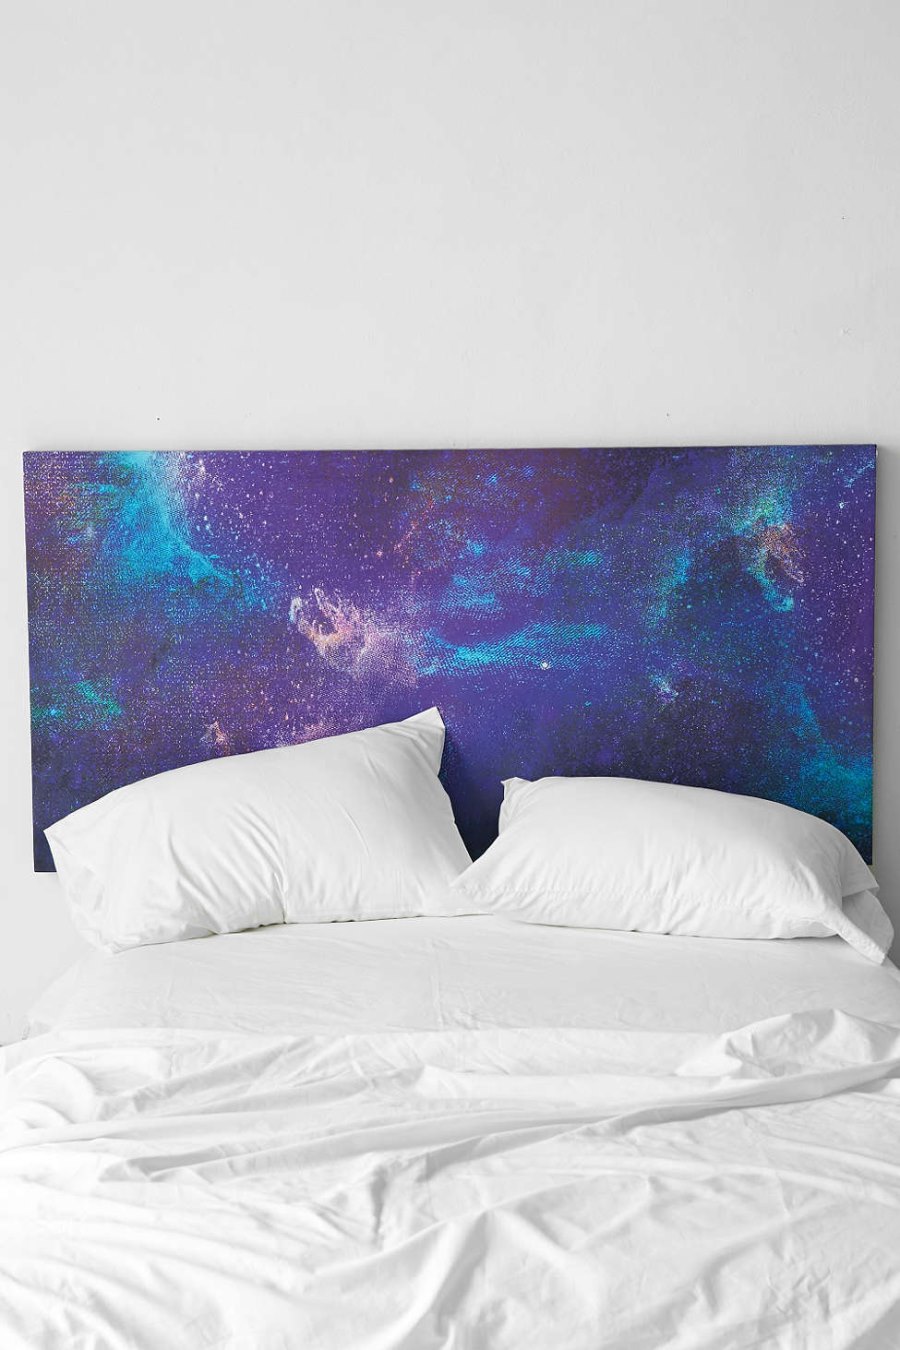 Cosmic headboard from Urban Outfitters